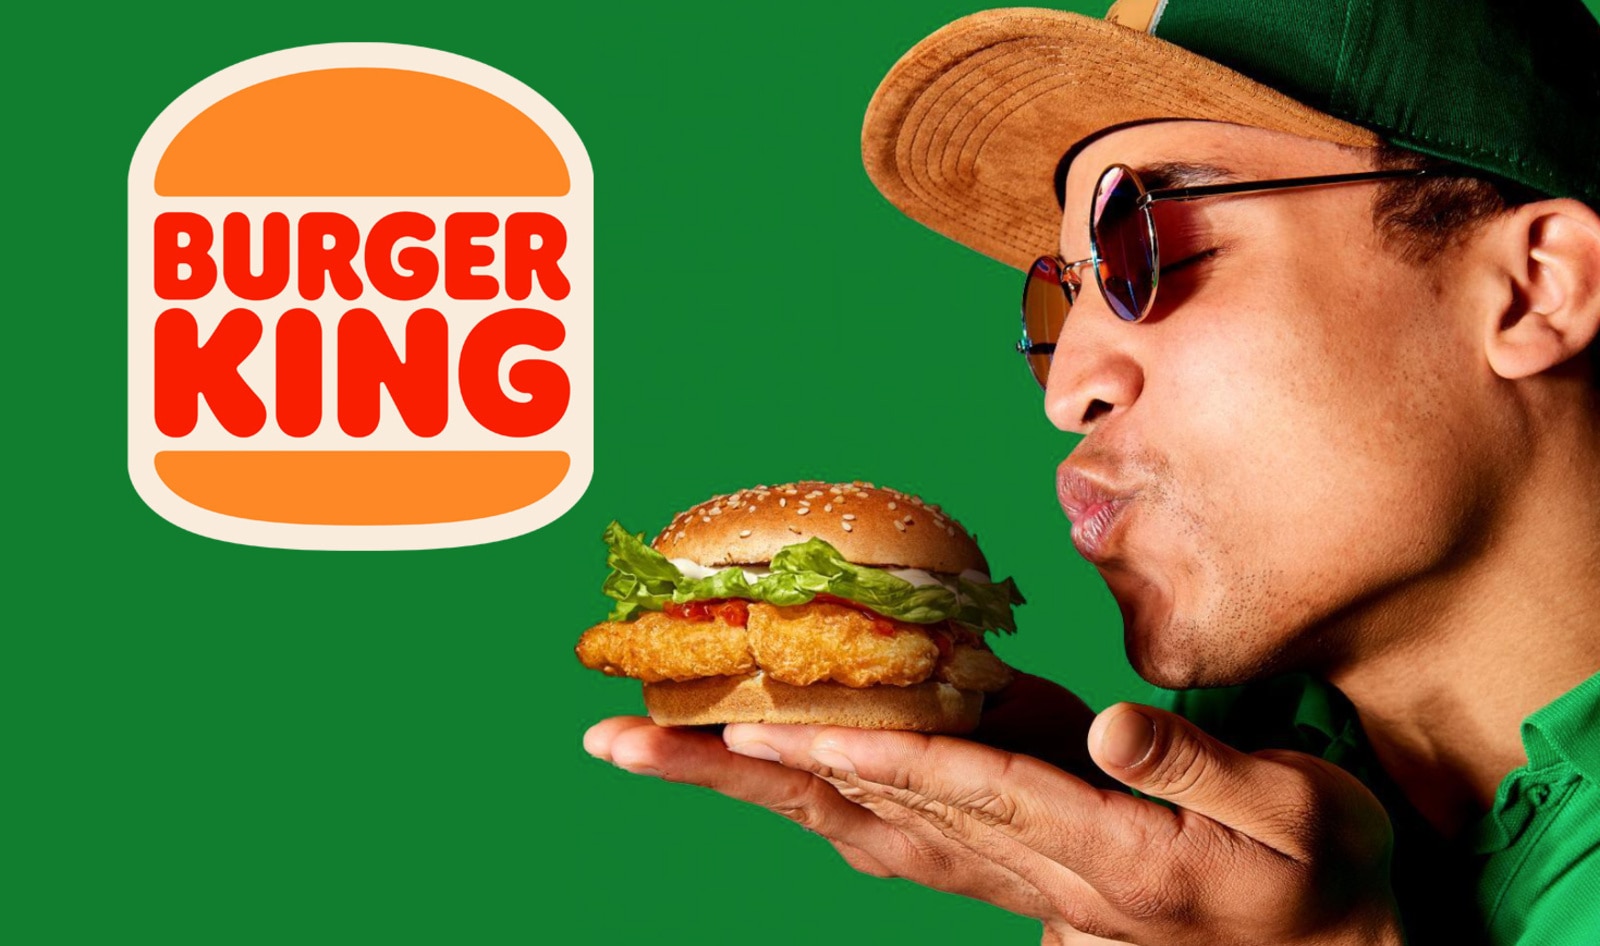 World’s First Meatless Burger King to Open in Germany